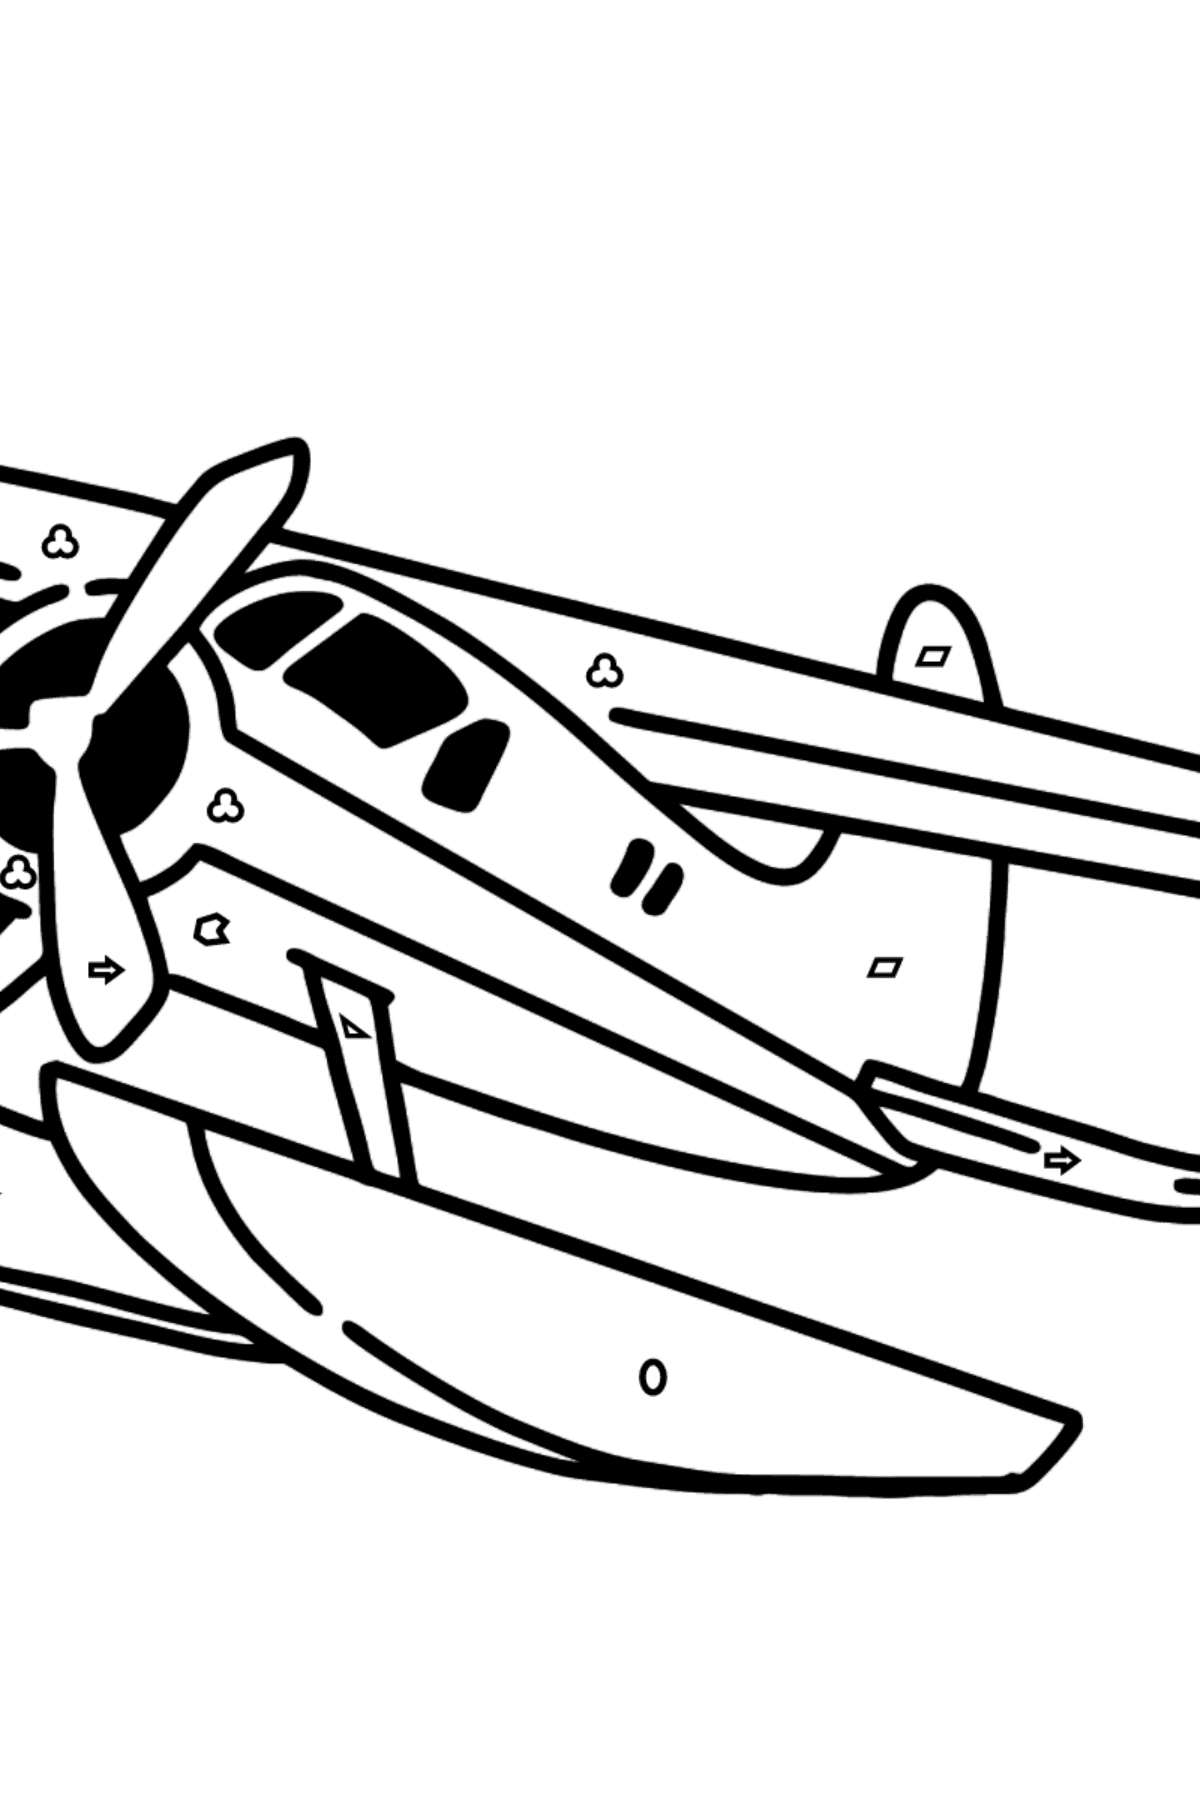 Jet Airplane BE-200 coloring page - Coloring by Geometric Shapes for Kids